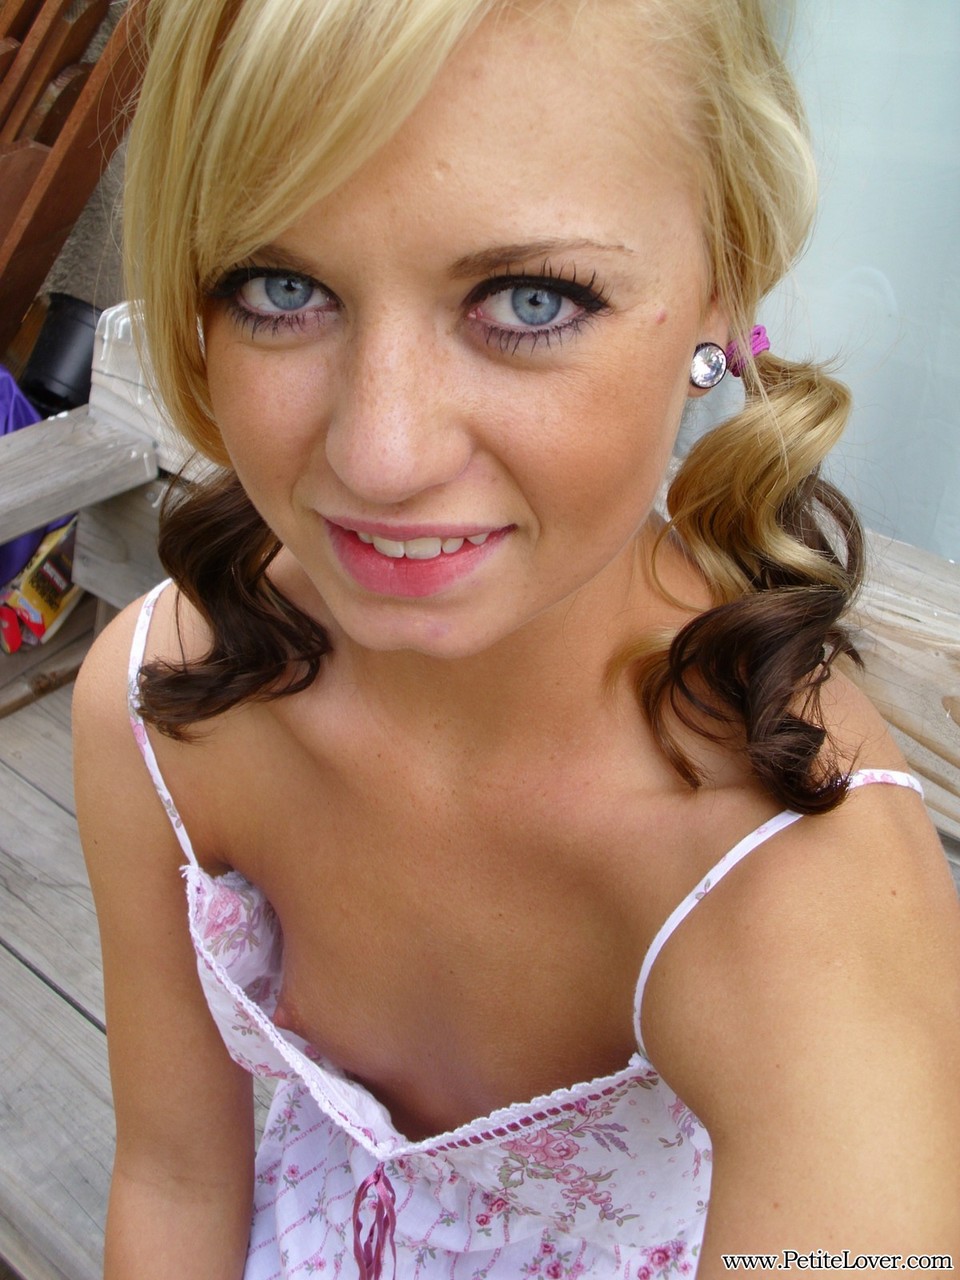 Cute blonde Tiff in pigtails showing off her wee small tits & tiny bald pussy porno foto #428478635 | Petite Lover Pics, Tiff, Amateur, mobiele porno